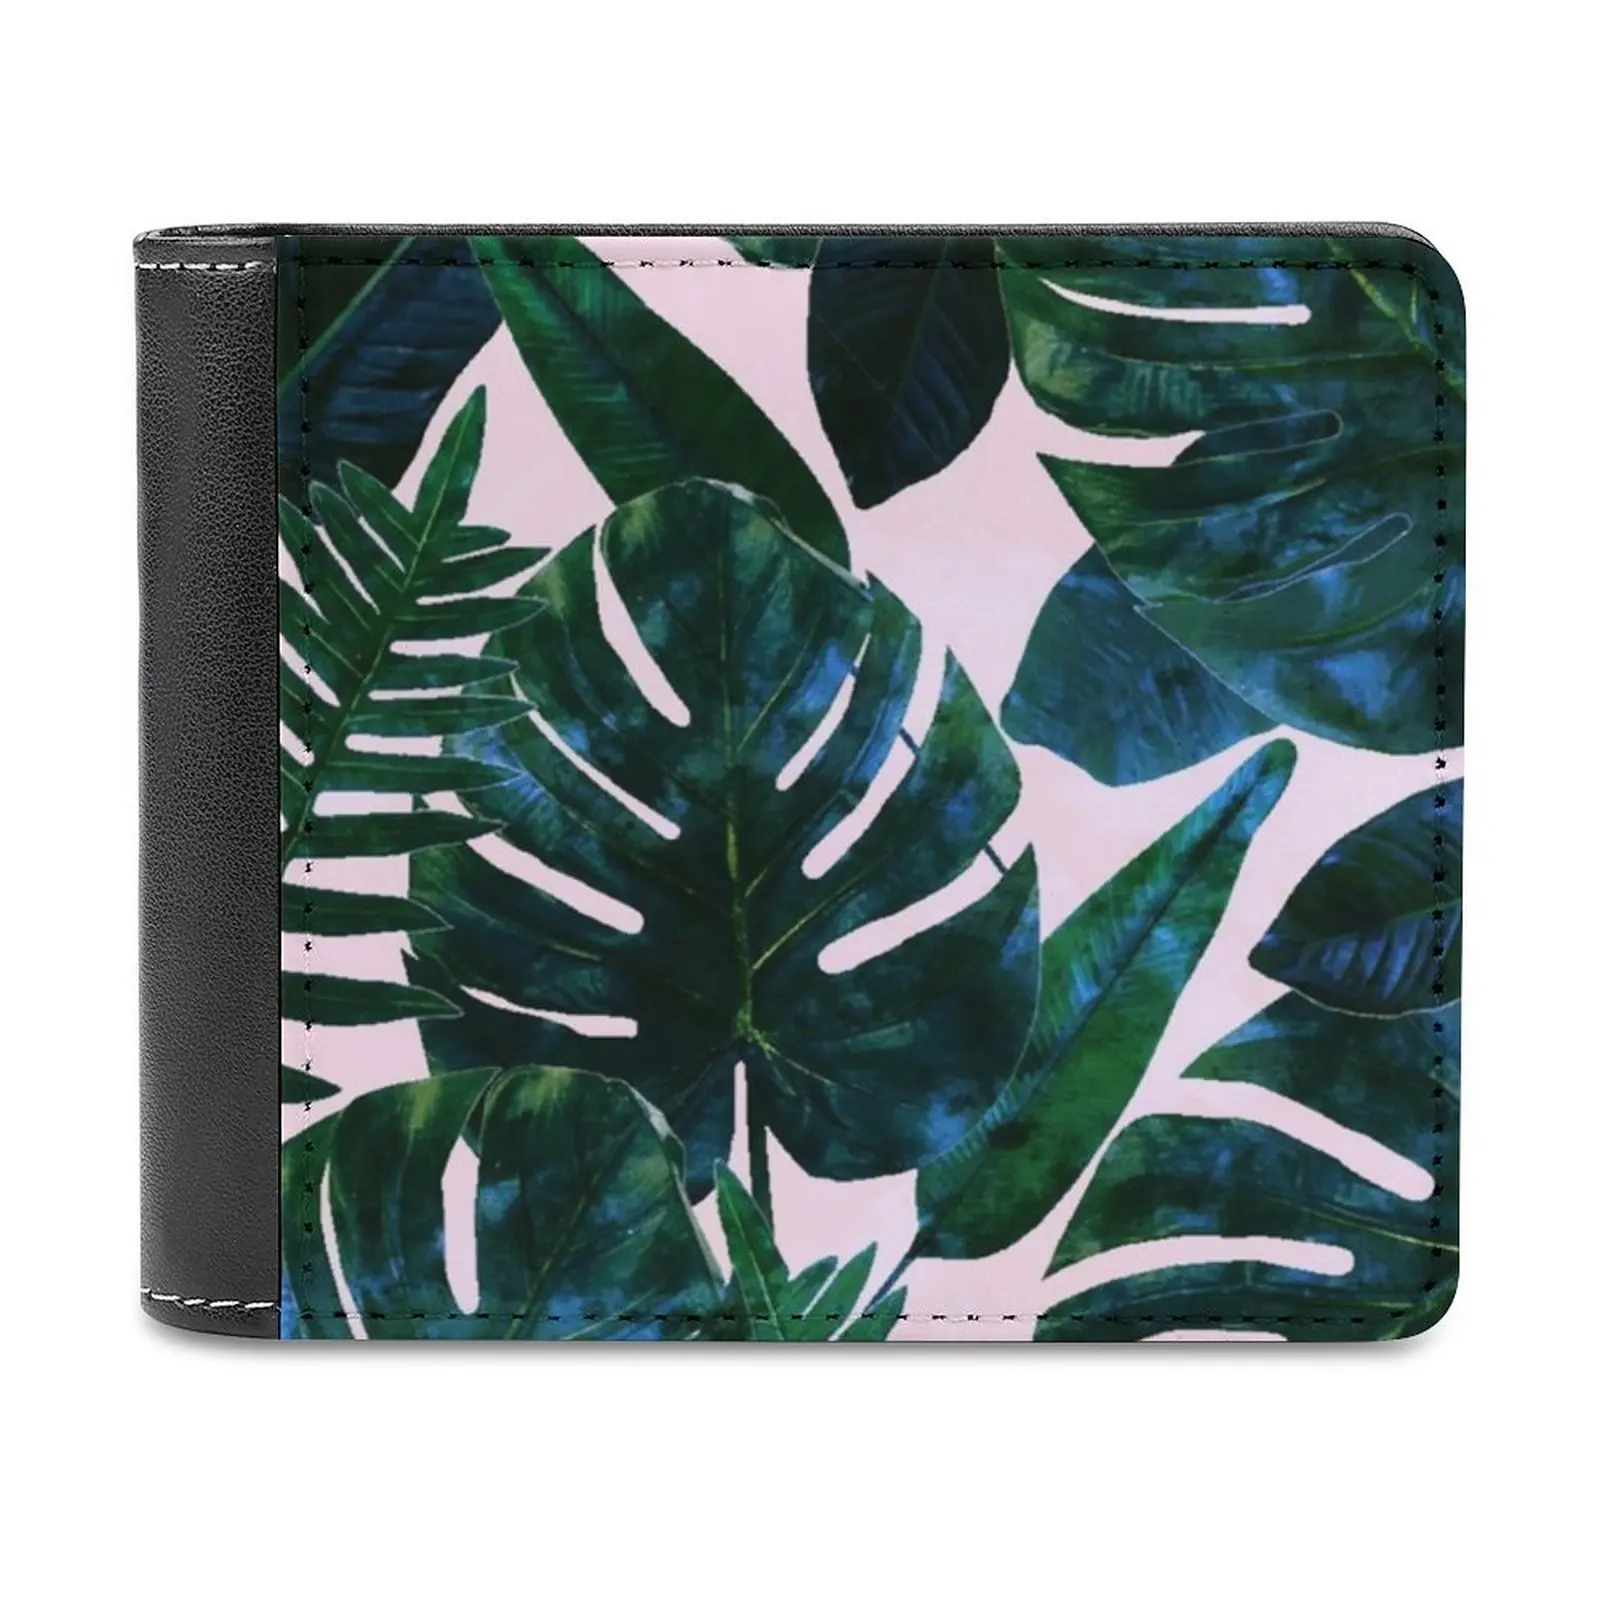 

Perceptive Dream Tropical Nature Botanical Plants Painting Palm Fashion Credit Card Wallet Leather Wallets Personalized Wallets